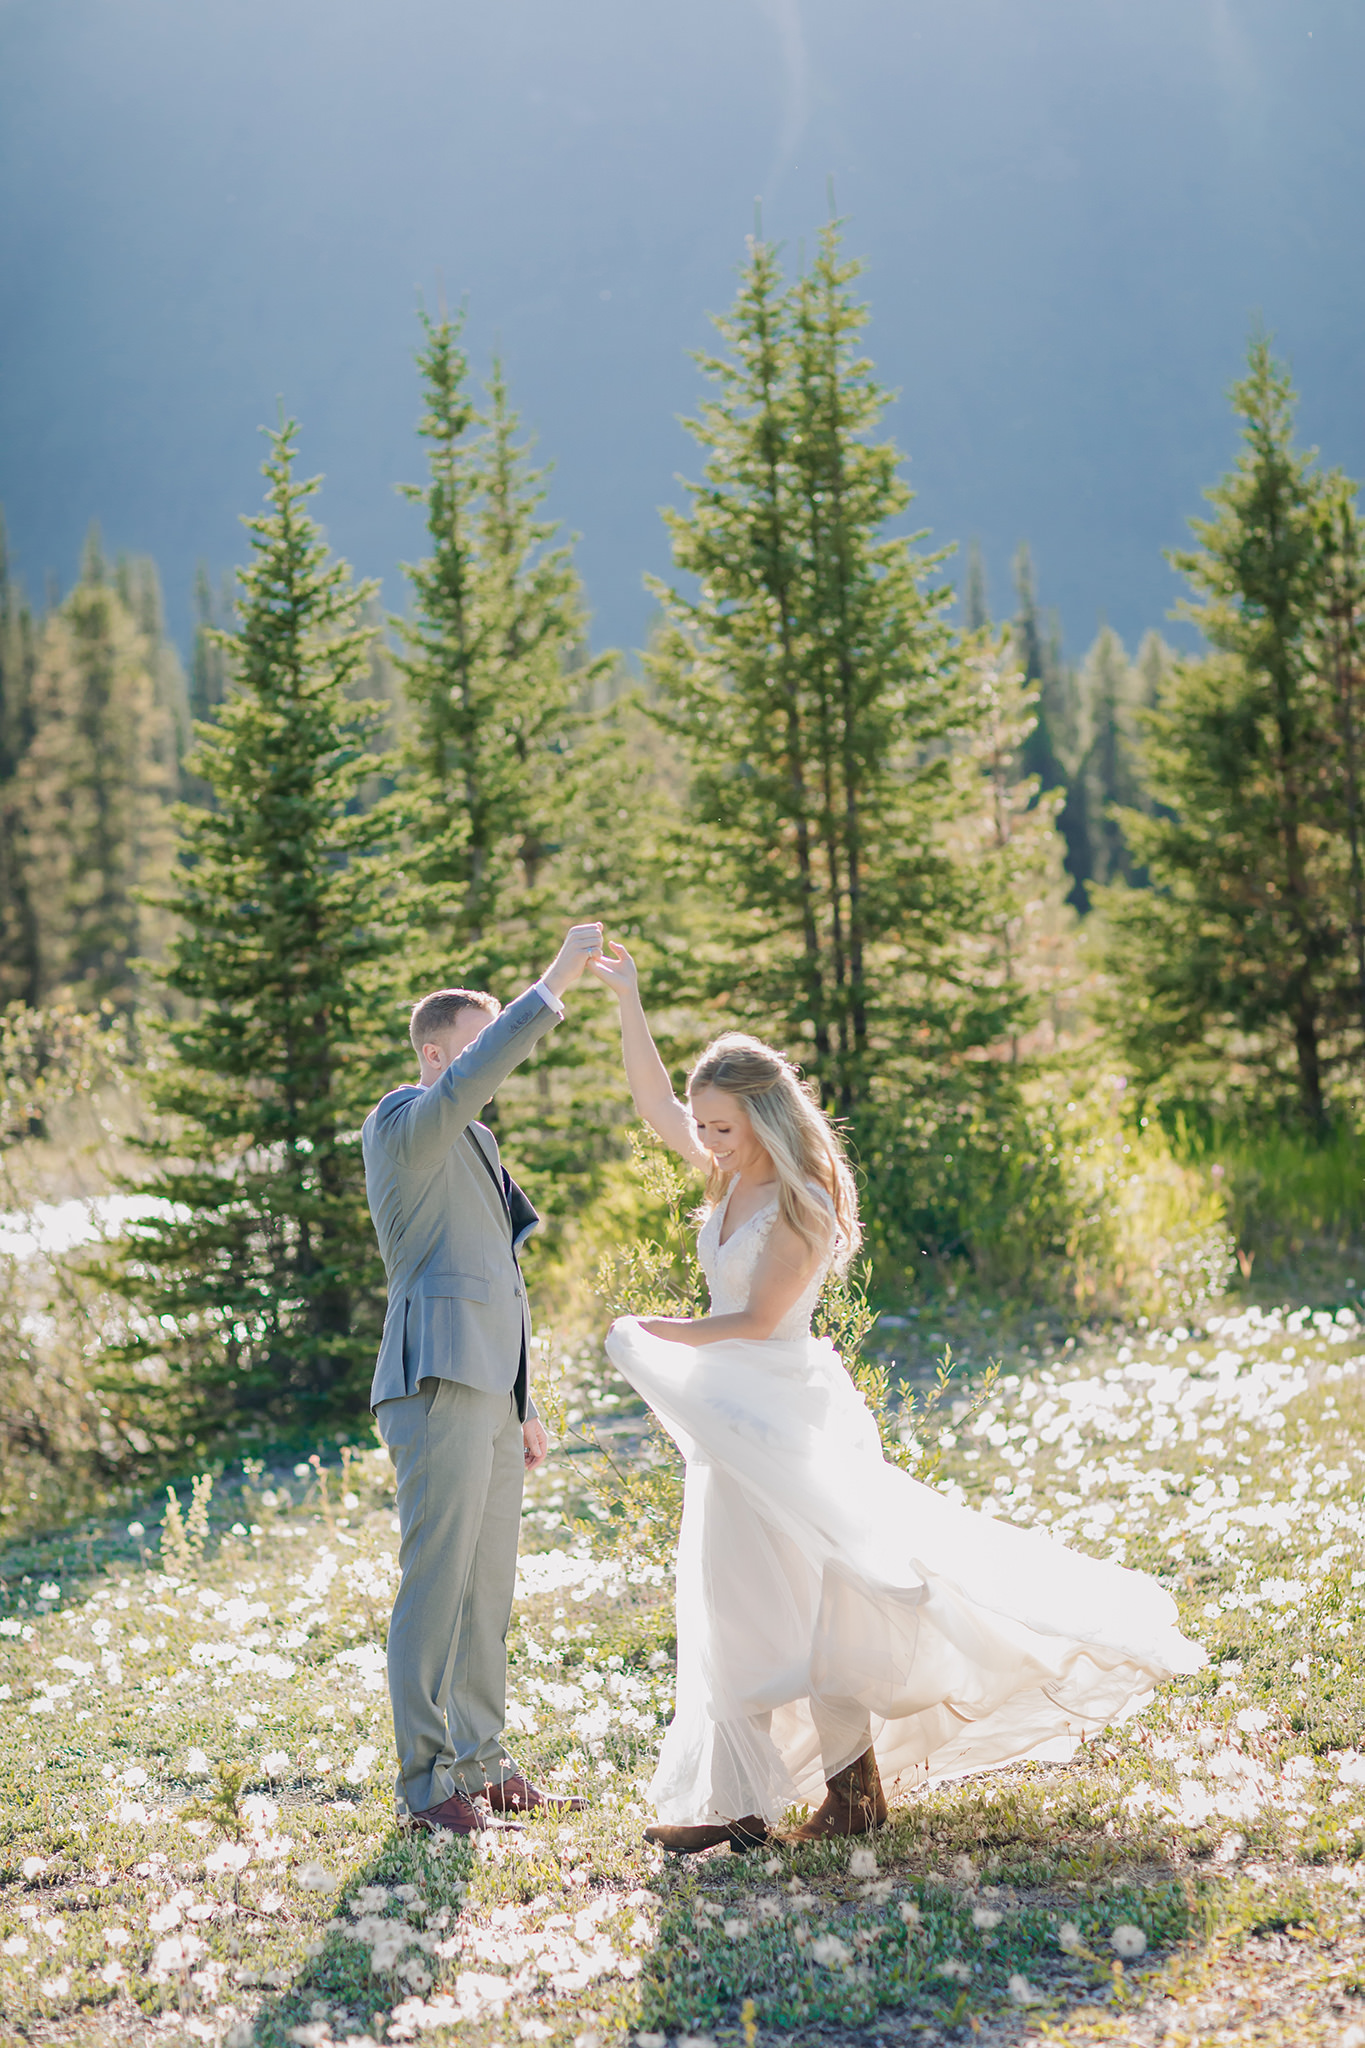 Exploring Icefields Parkway in Banff National Park on their wedding day. Summer mountain elopement at Silverhorn Creek photographed by local wedding & elopement photographer ENV Photography 